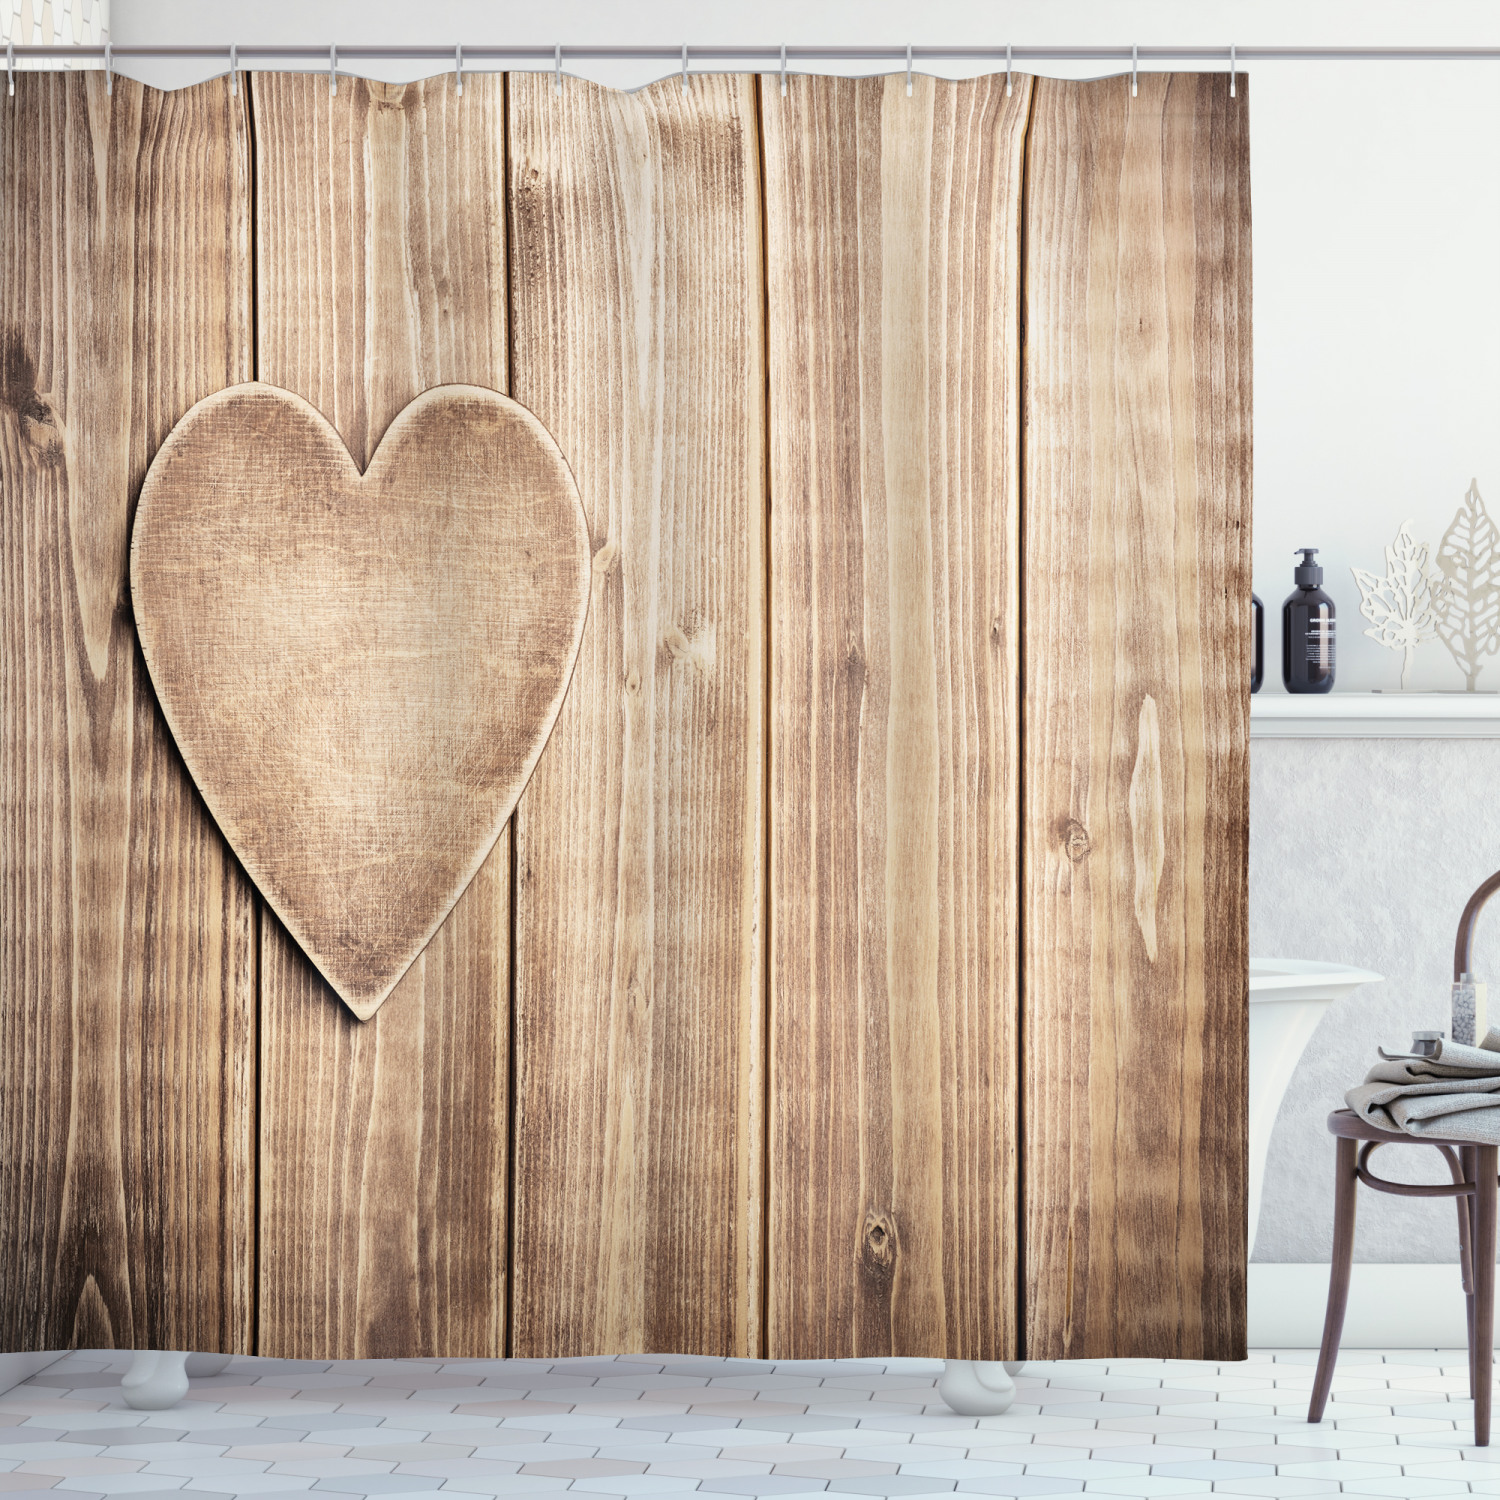 Rustic Heart Background